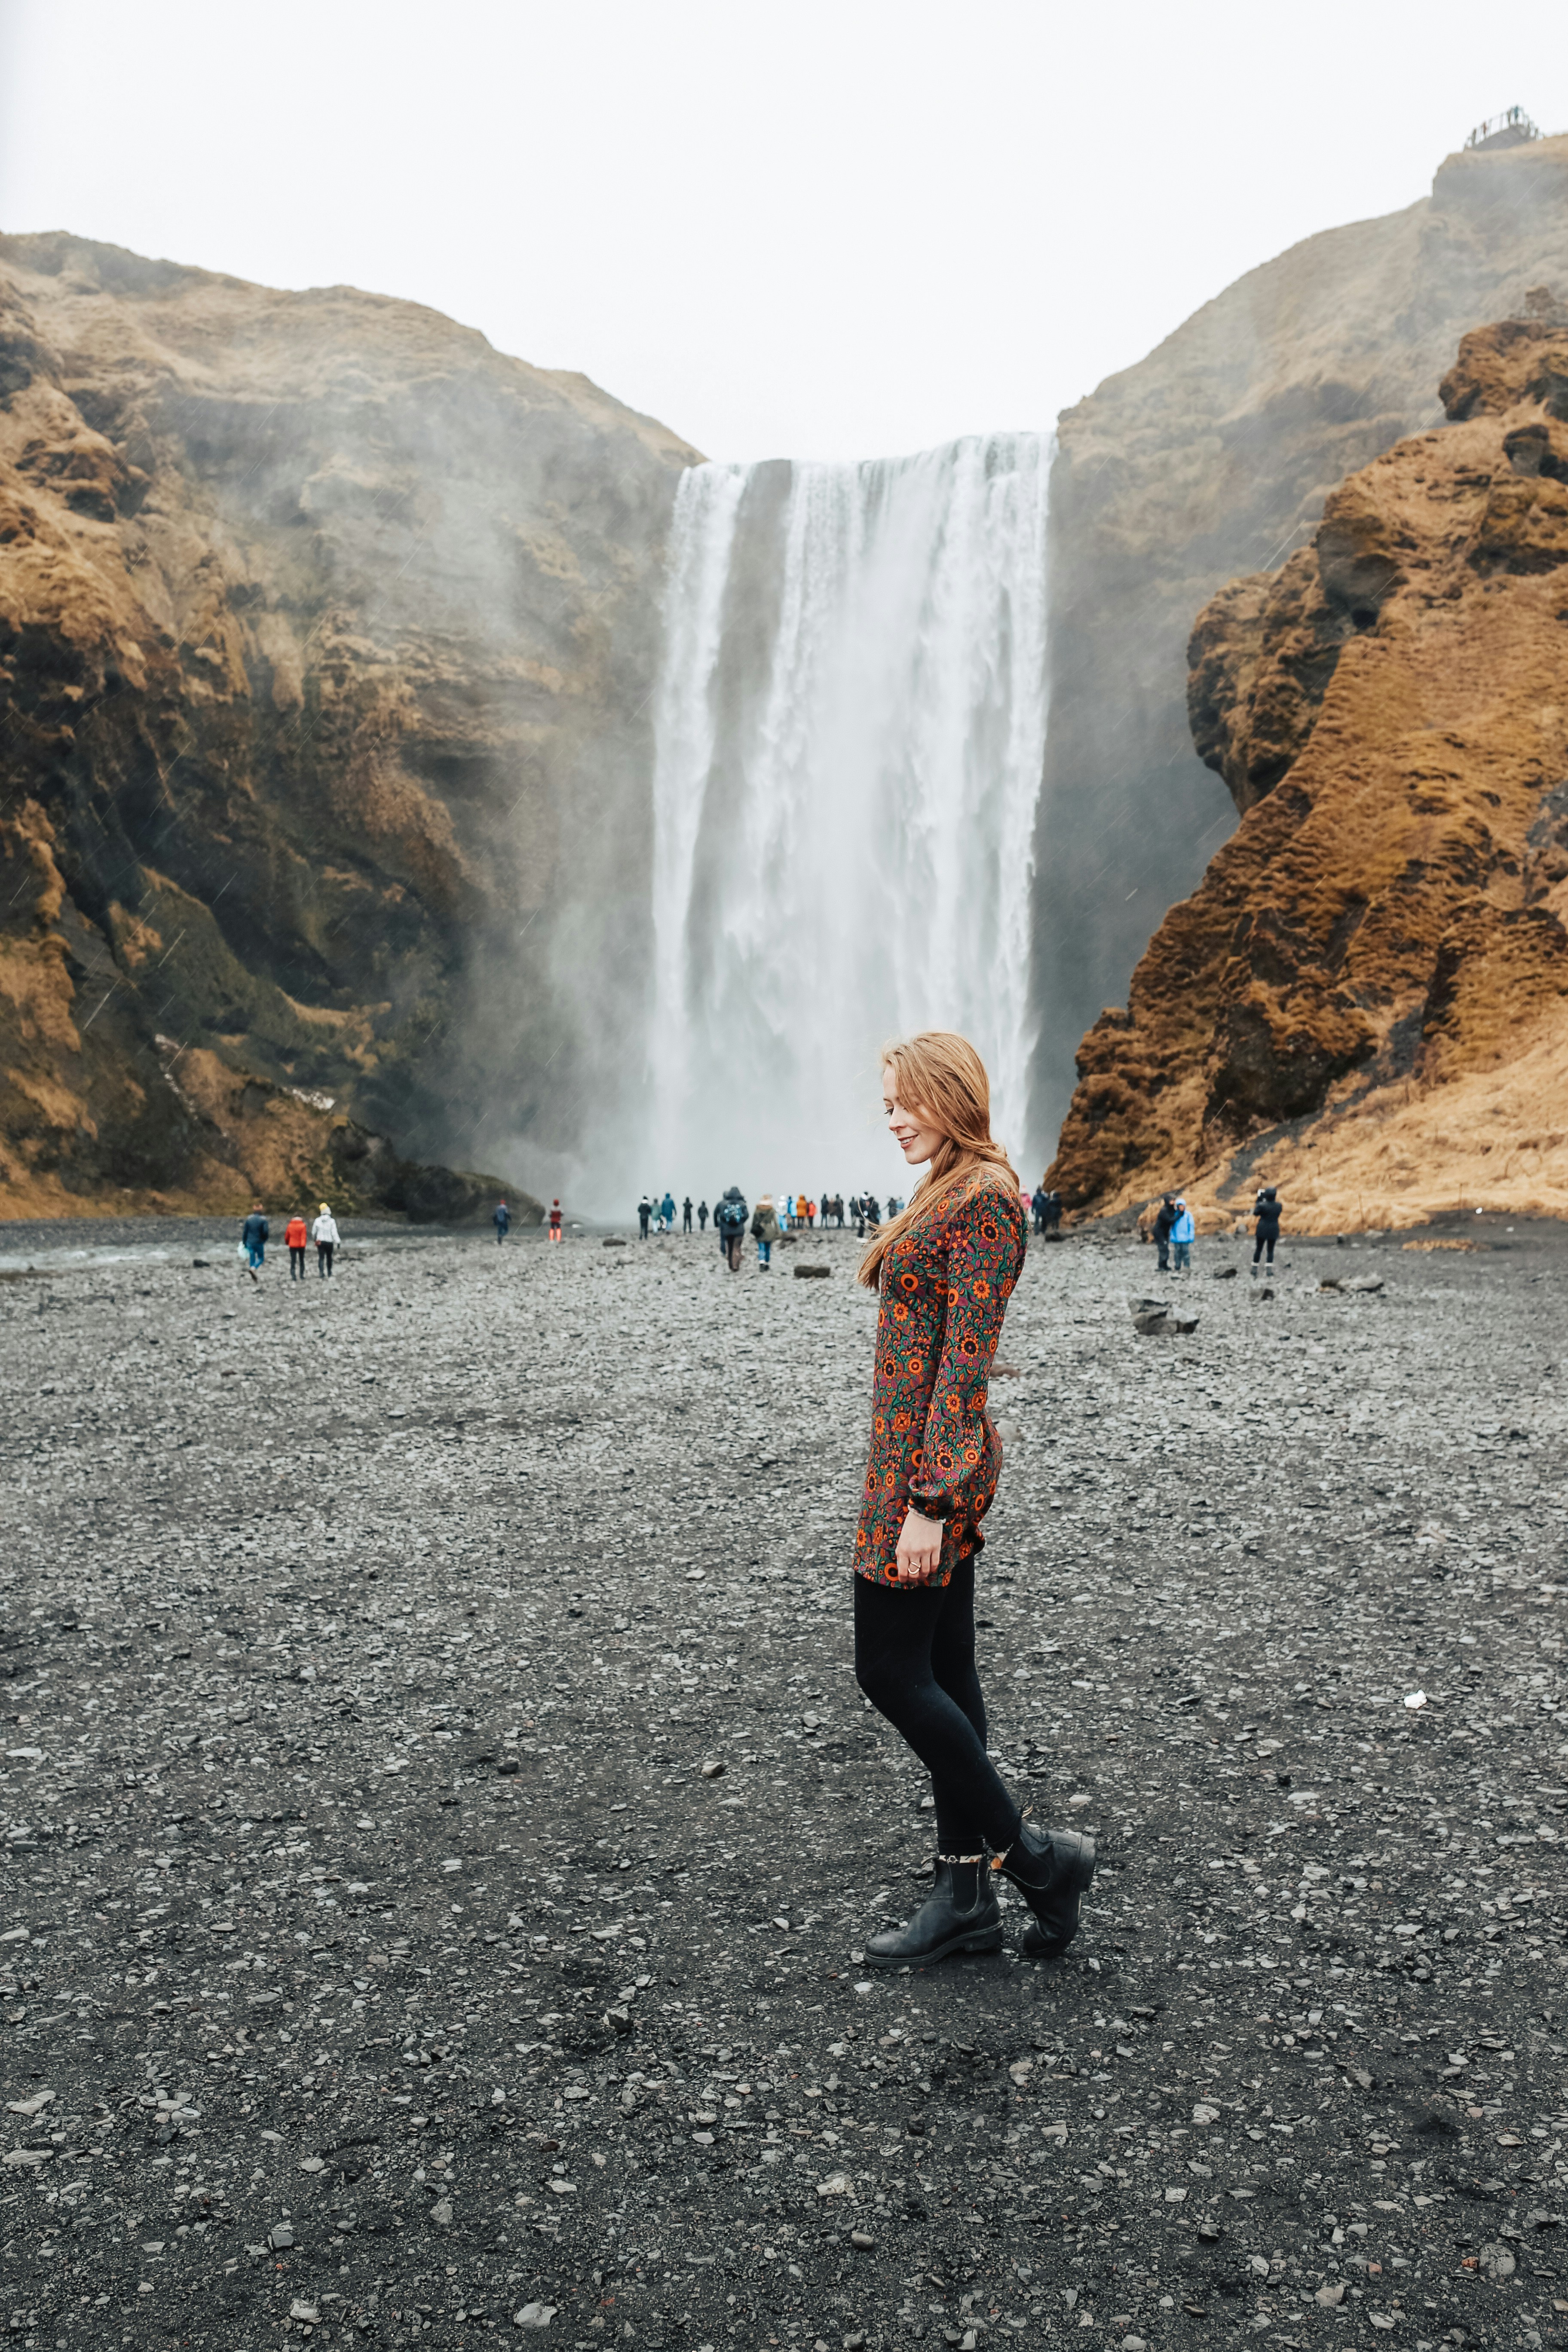 Southern Iceland Vik Travel Itinerary: I wore this floral printed dress that has a retro-Nordic flair. Skógafoss is such a stunning backdrop for photos.